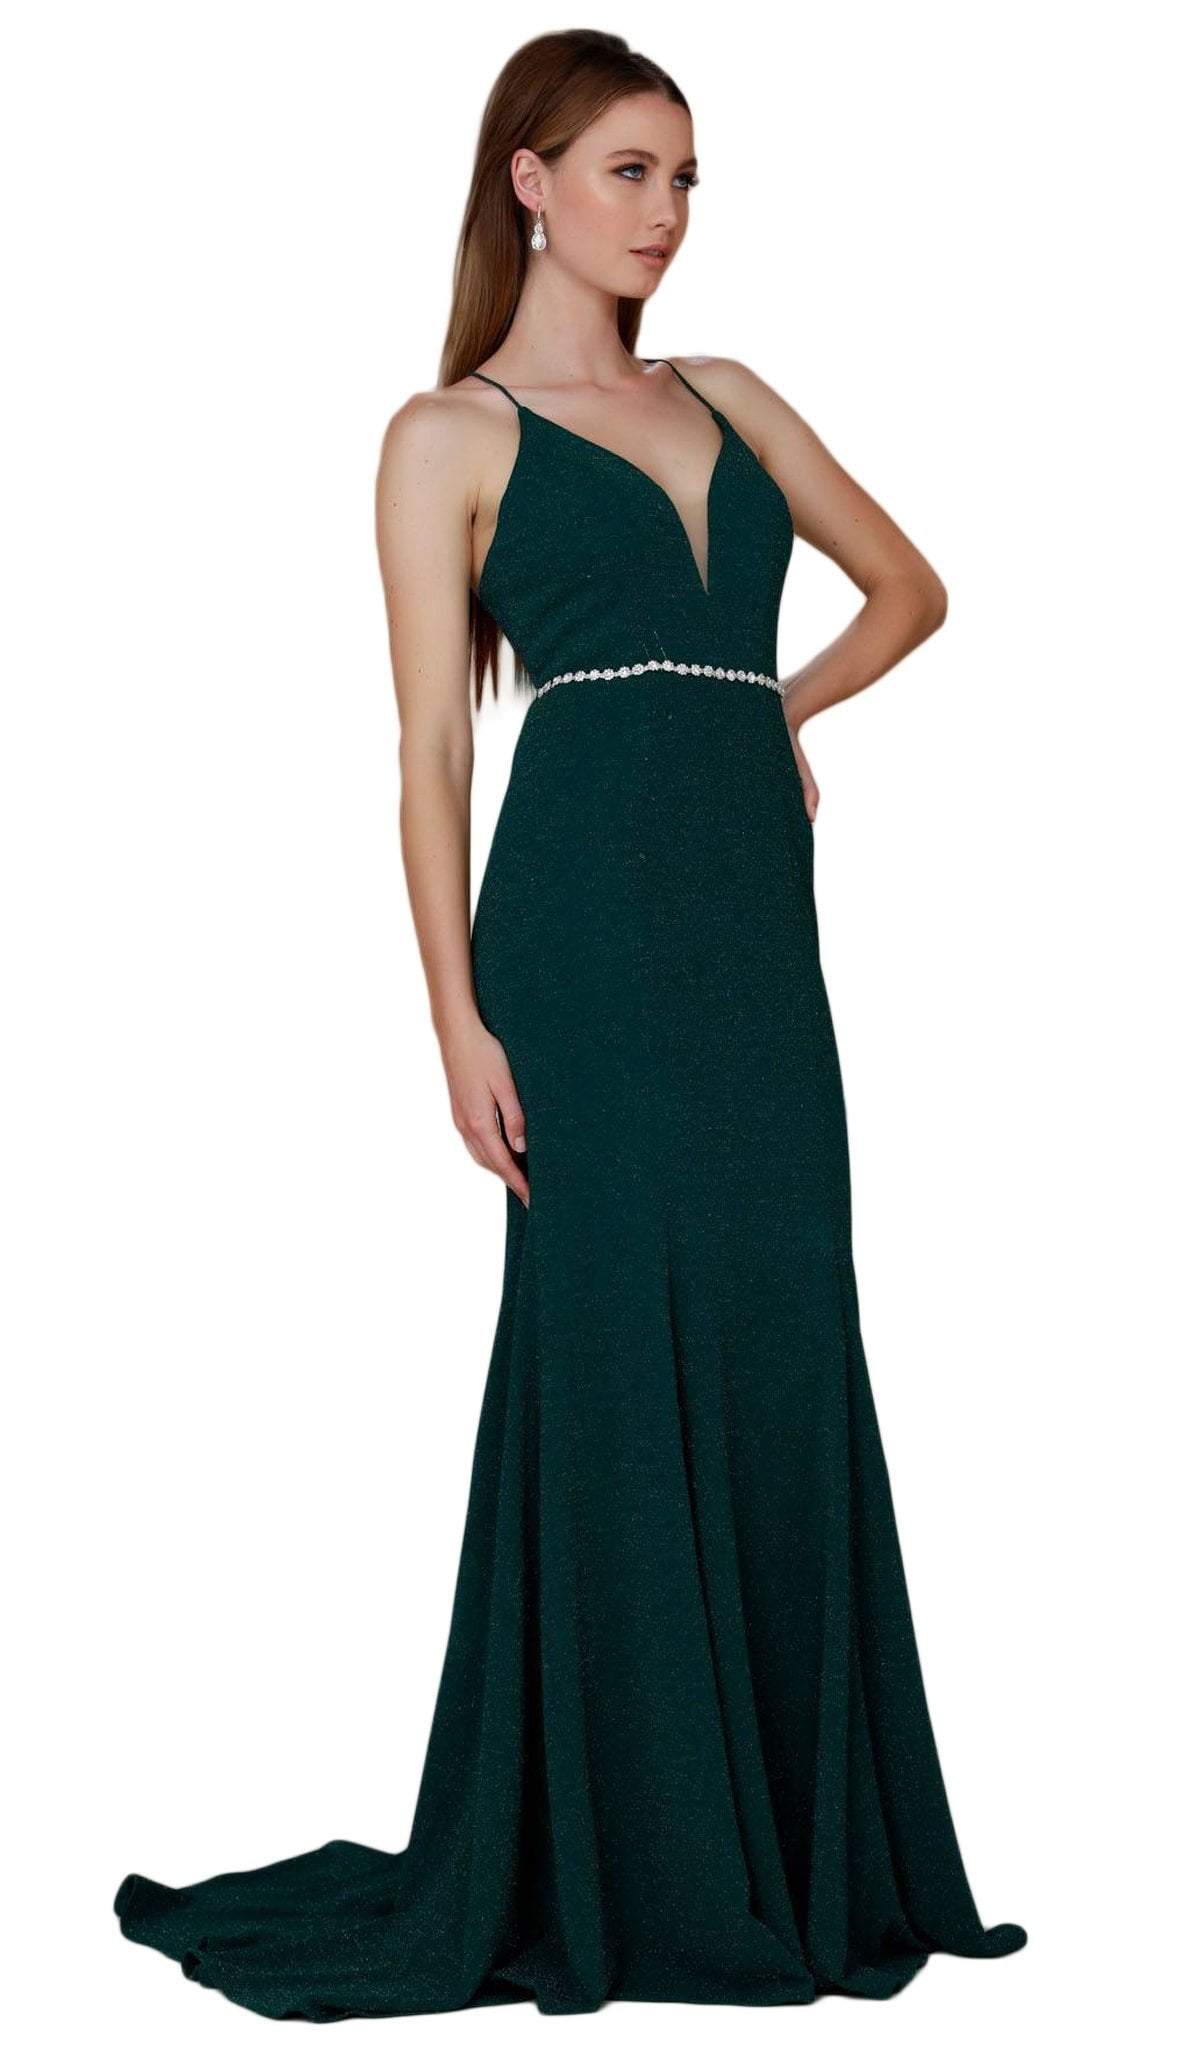 Nox Anabel - N160 Plunging V-Neck Strappy Low Cut Gown Special Occasion Dress XS / Green